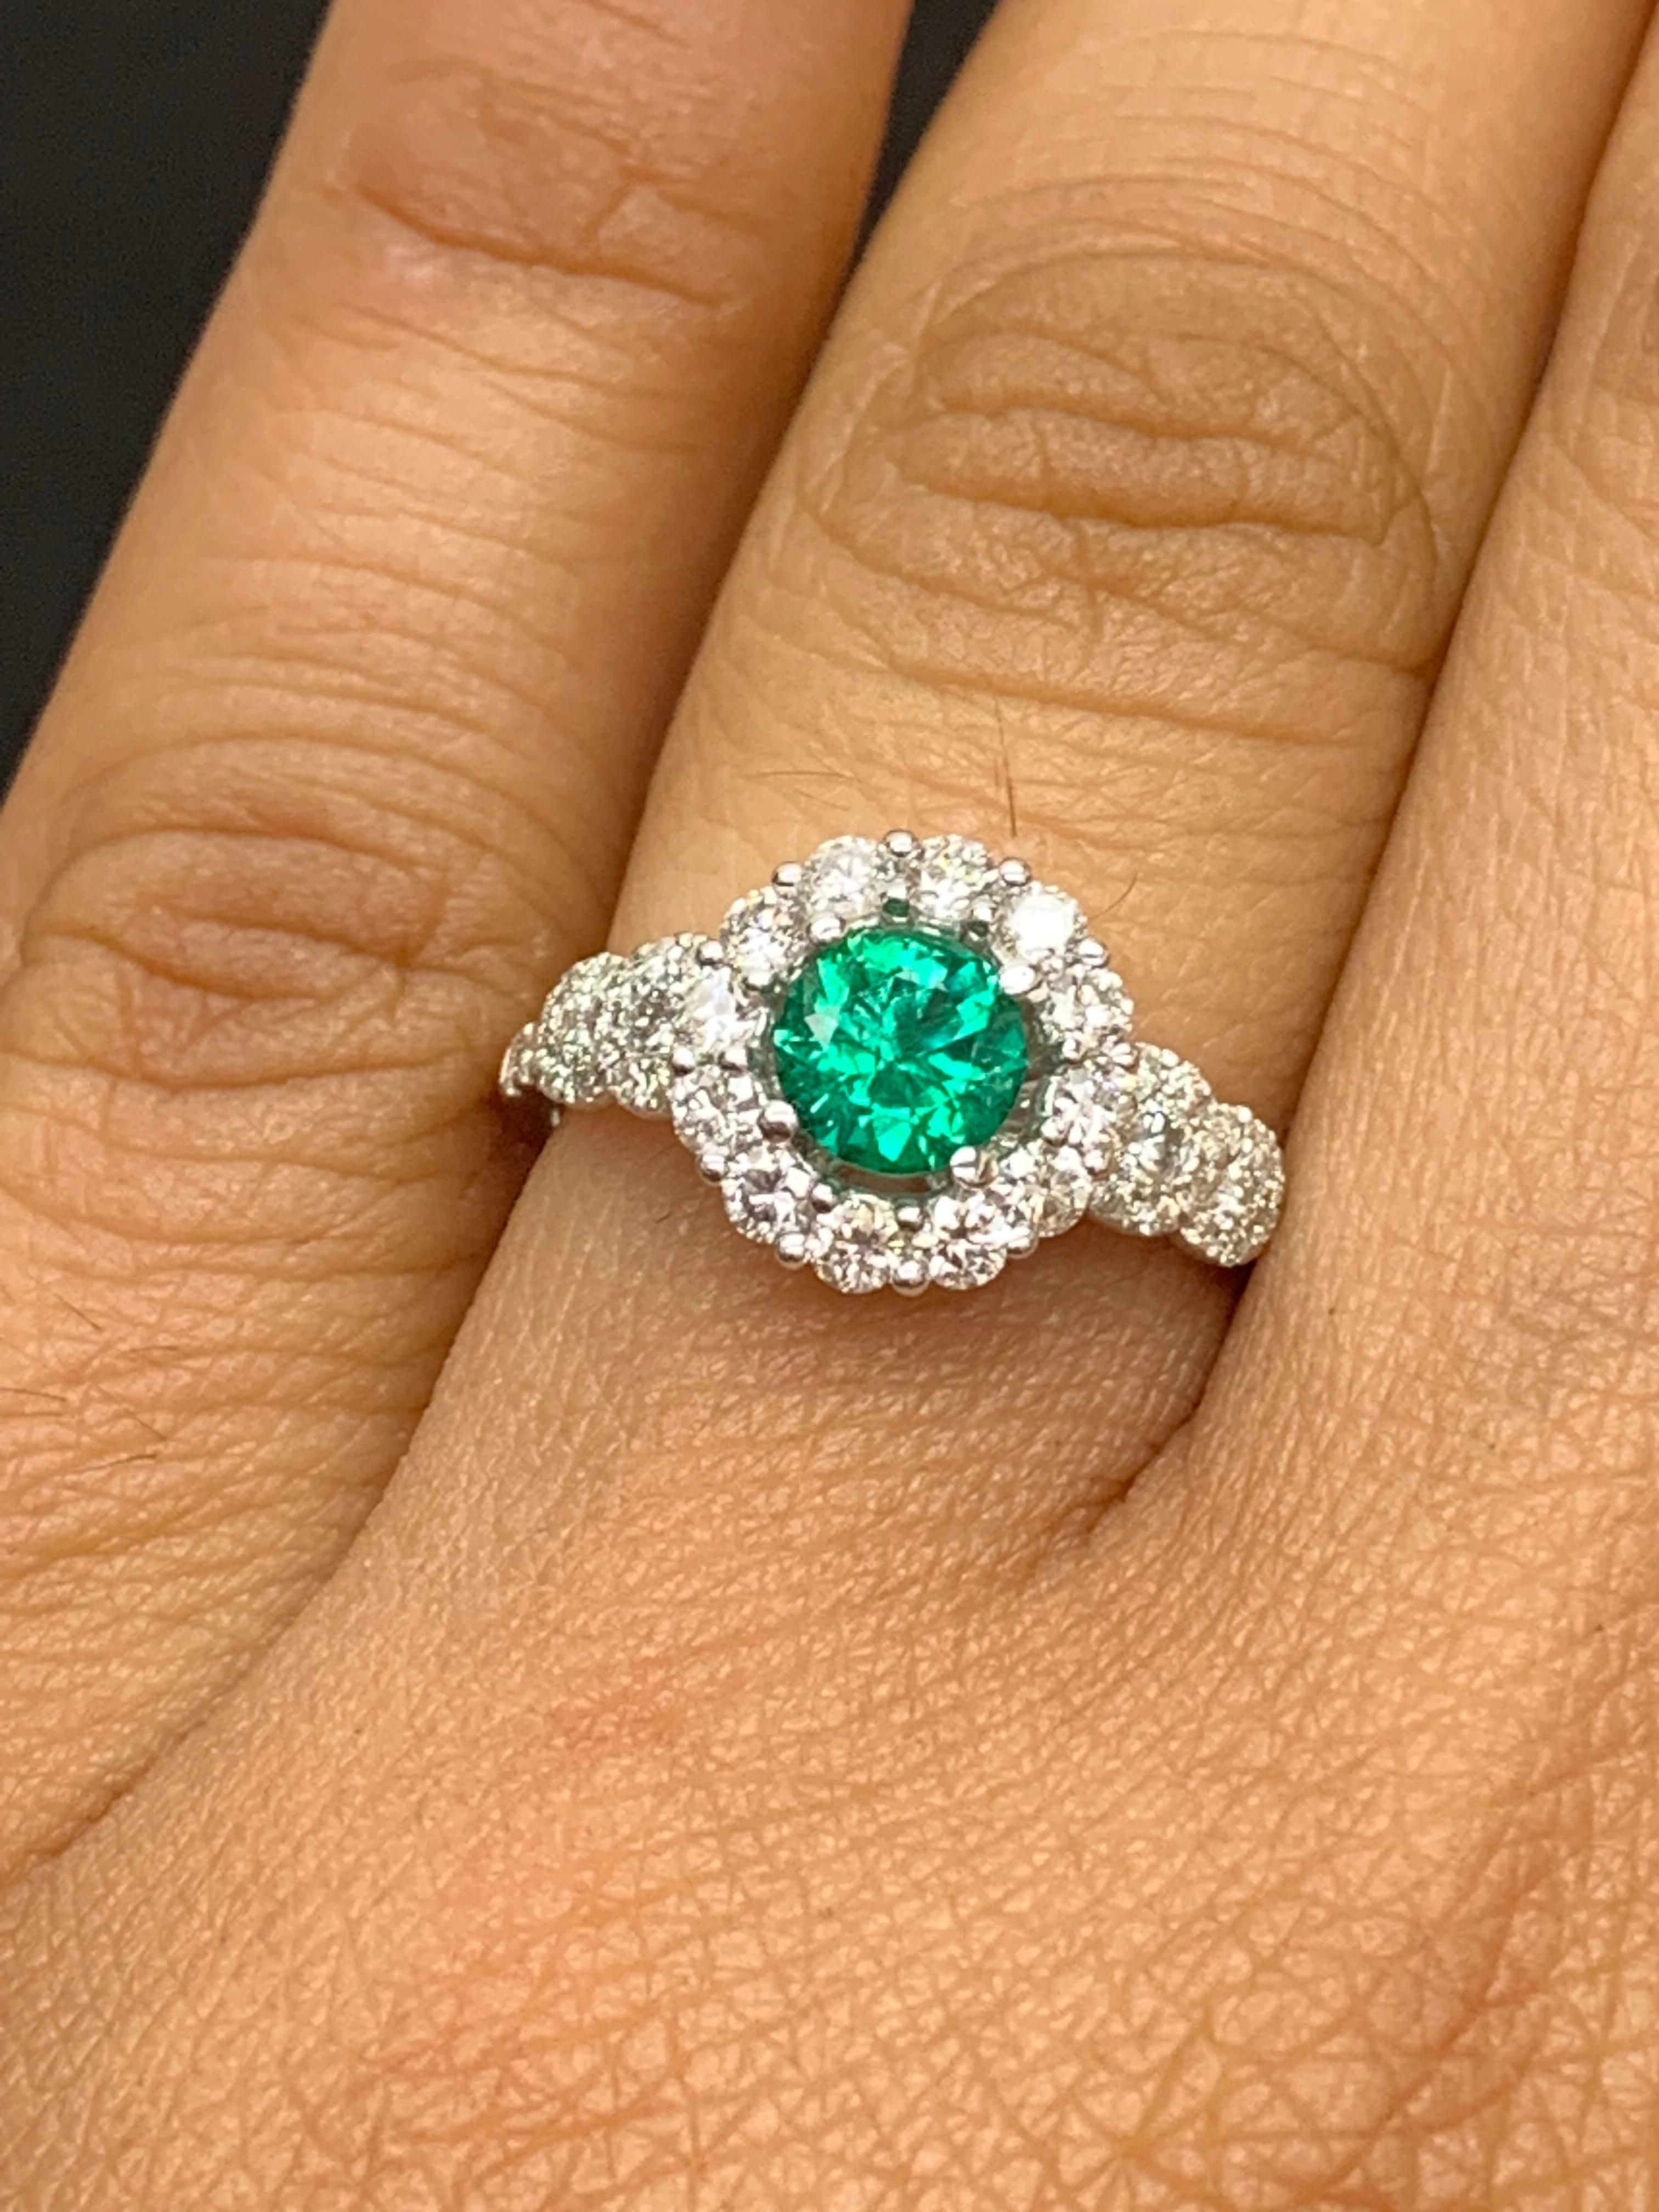 Contemporary 0.62 Carat Round Cut Emerald and Diamond Fashion Ring in 18k White Gold For Sale